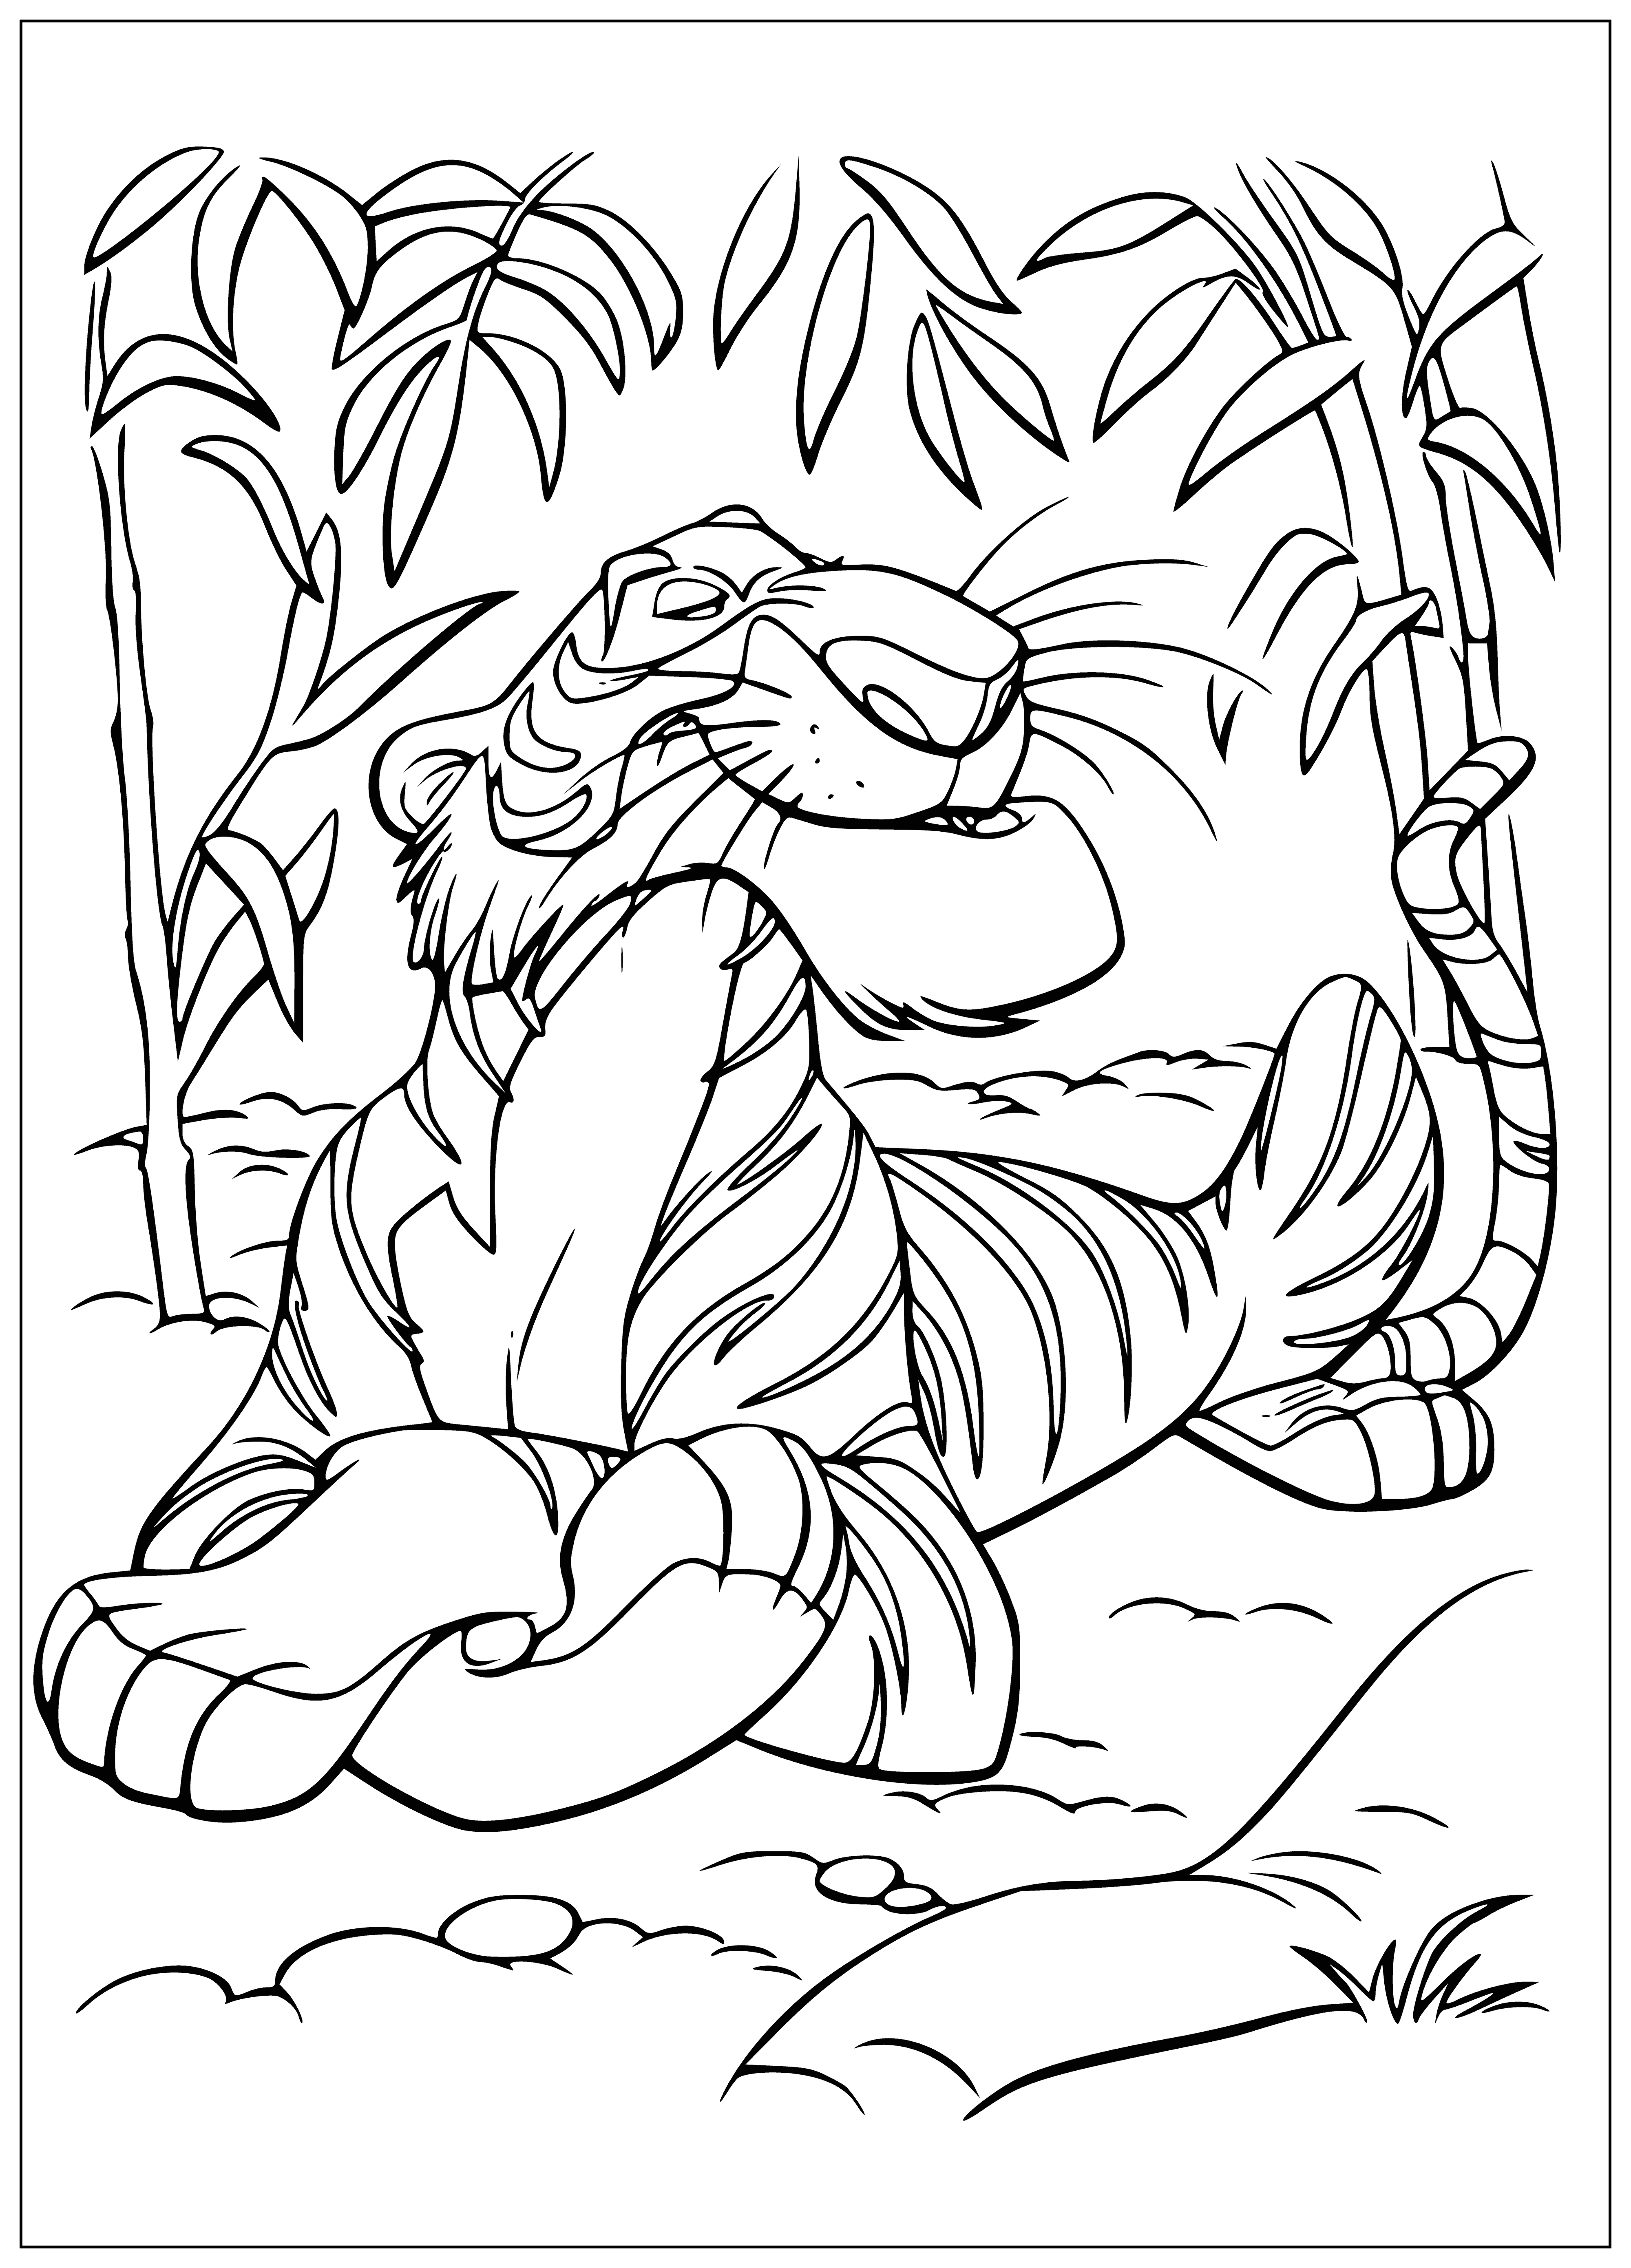 coloring page: Tiger Shere Khan lies in the jungle, striped coat, eyes closed, mouth open, sharp teeth.